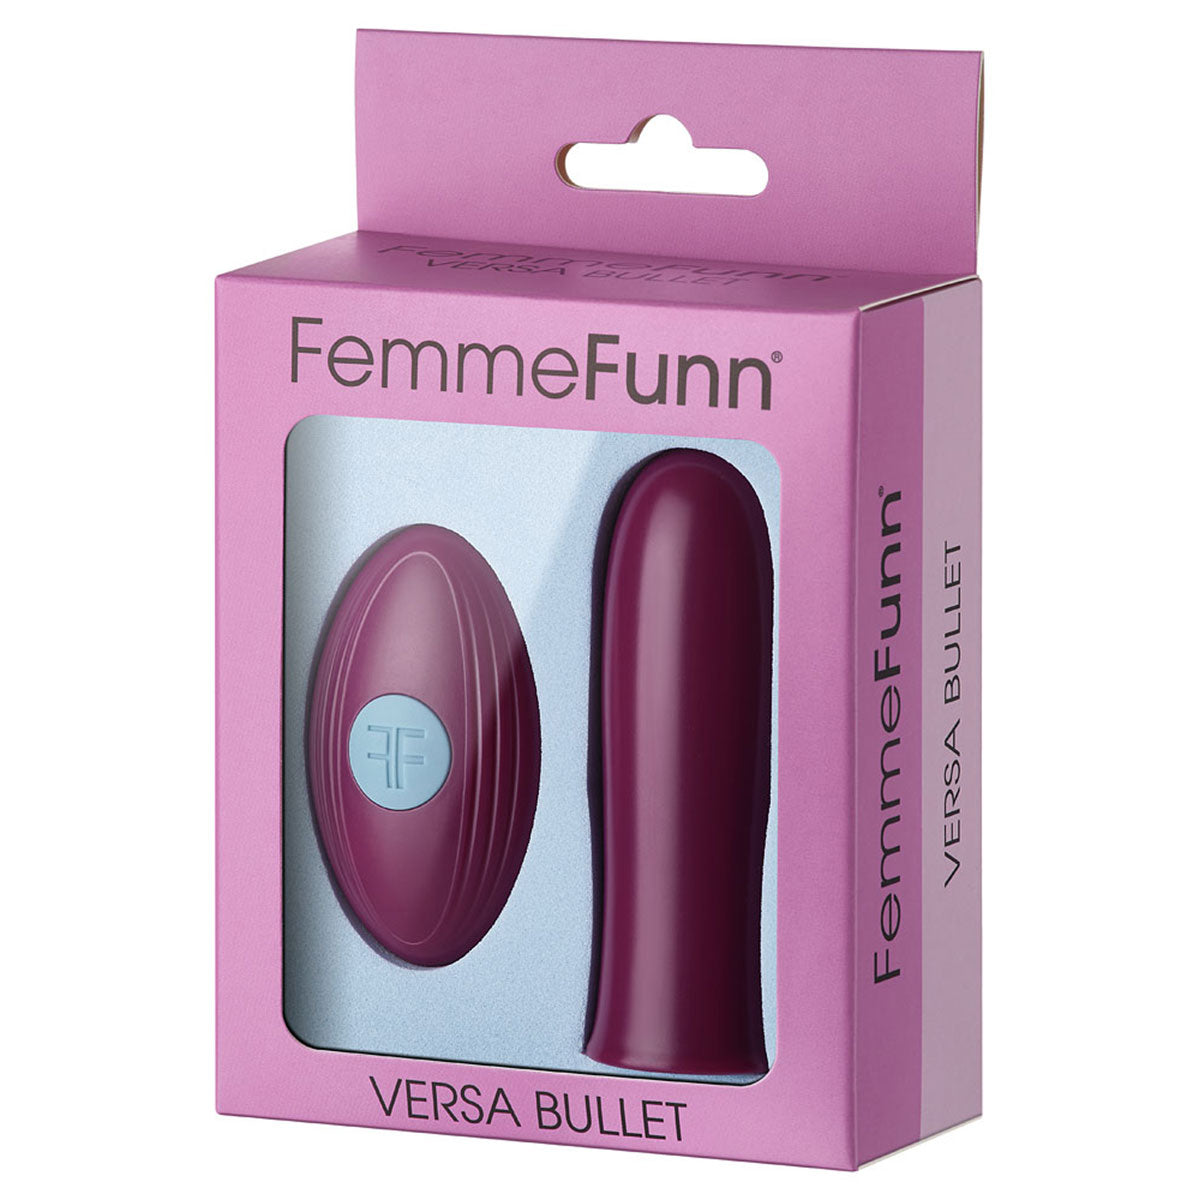 Femme Funn Versa Bullet and Remote